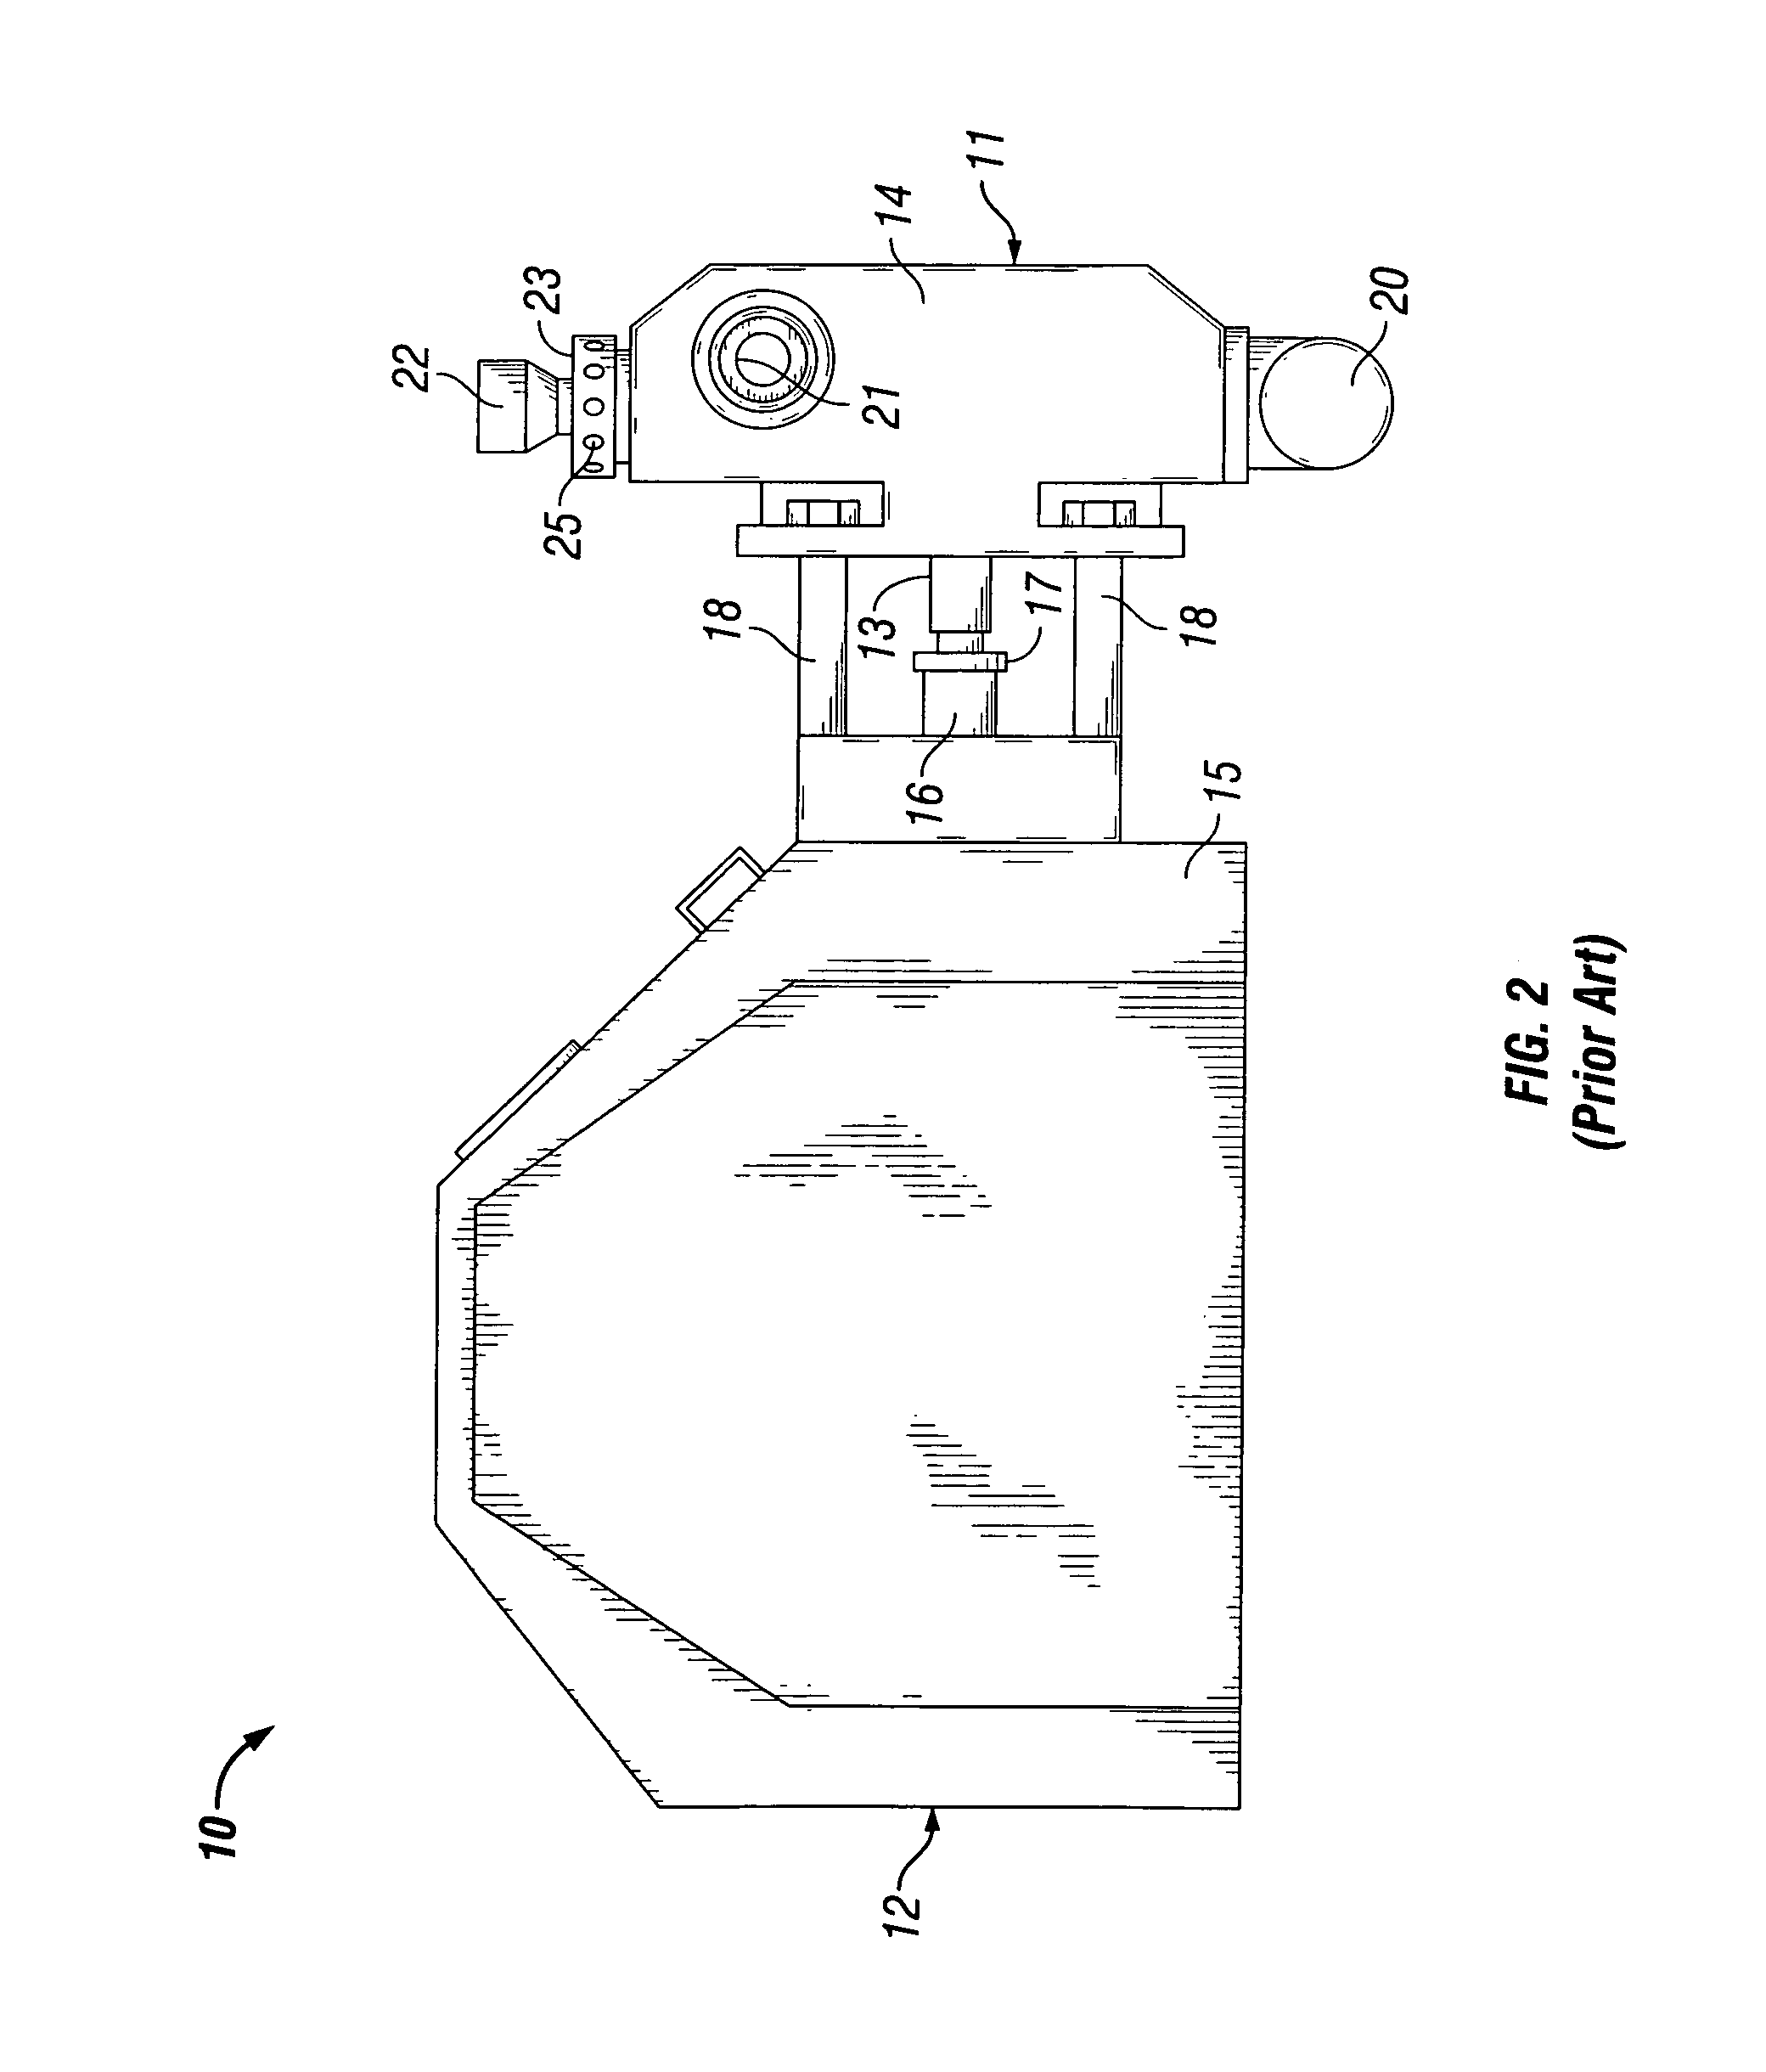 Retaining mechanisms for threaded bodies in reciprocating pumps